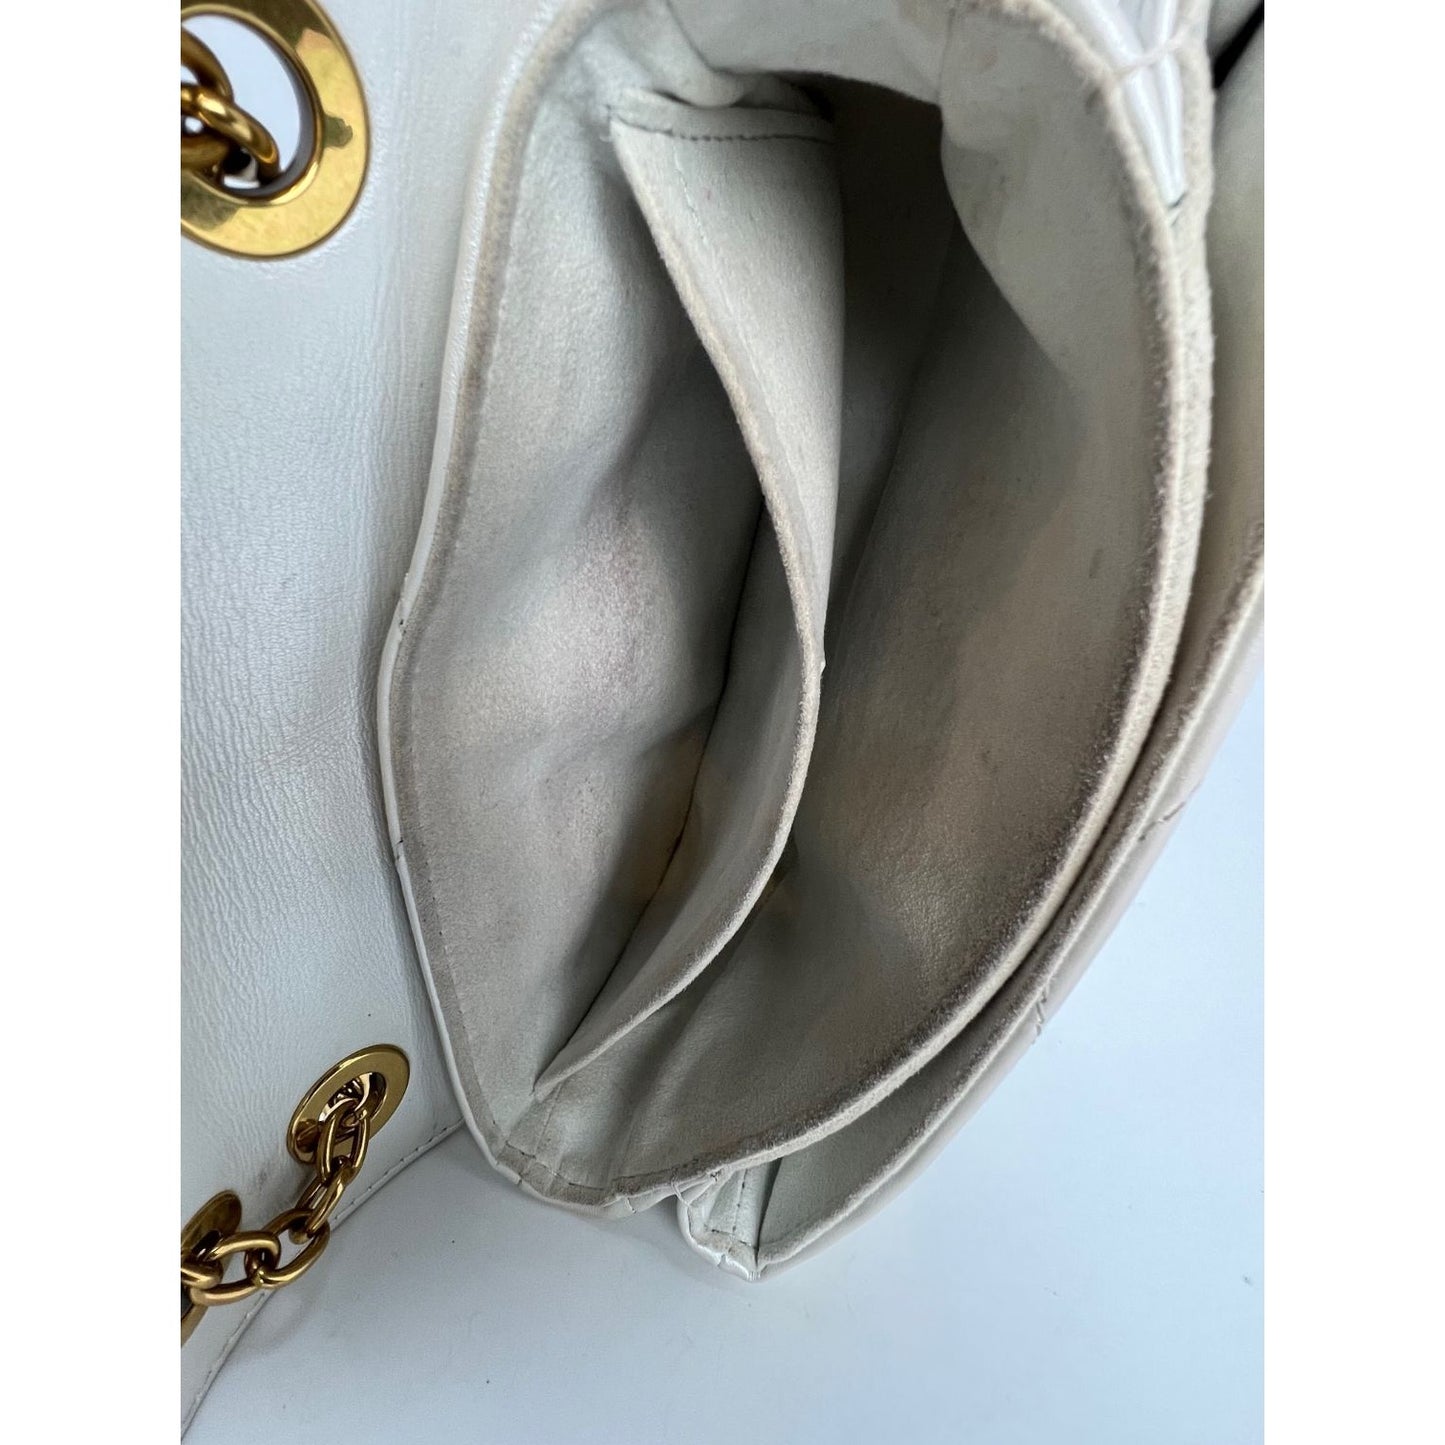 LOUIS VUITTON: LV NEW WAVE CHAIN BAG (SIZE MM) - REVIEW AND 1 YEAR